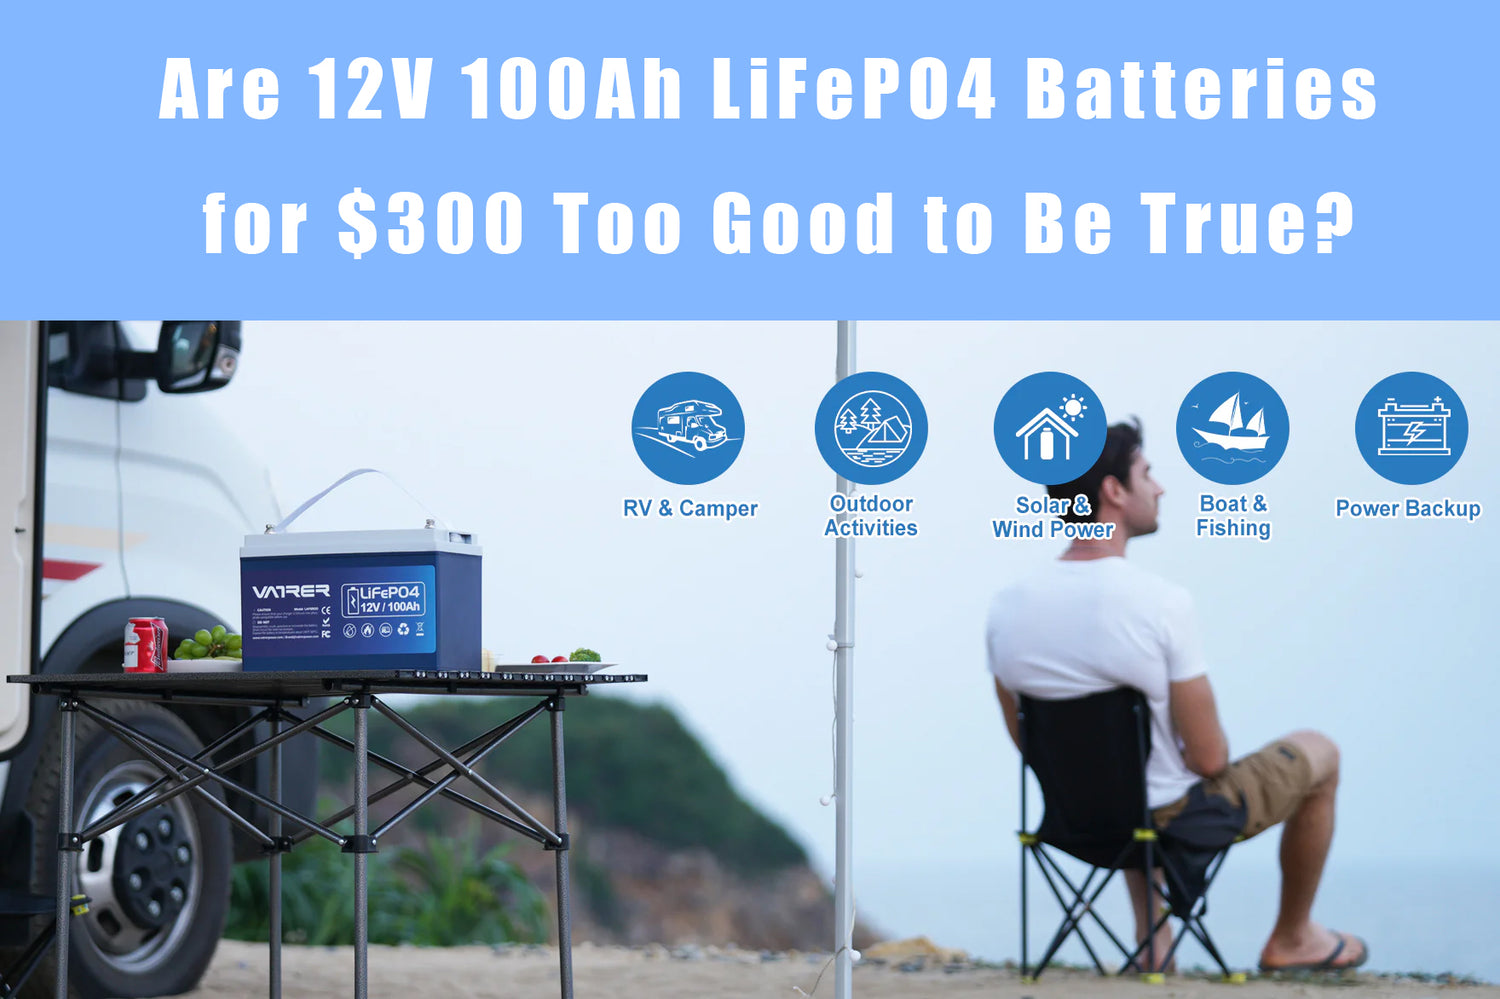 Are 12V 100Ah LiFePO4 Batteries for $300 Too Good to Be True?